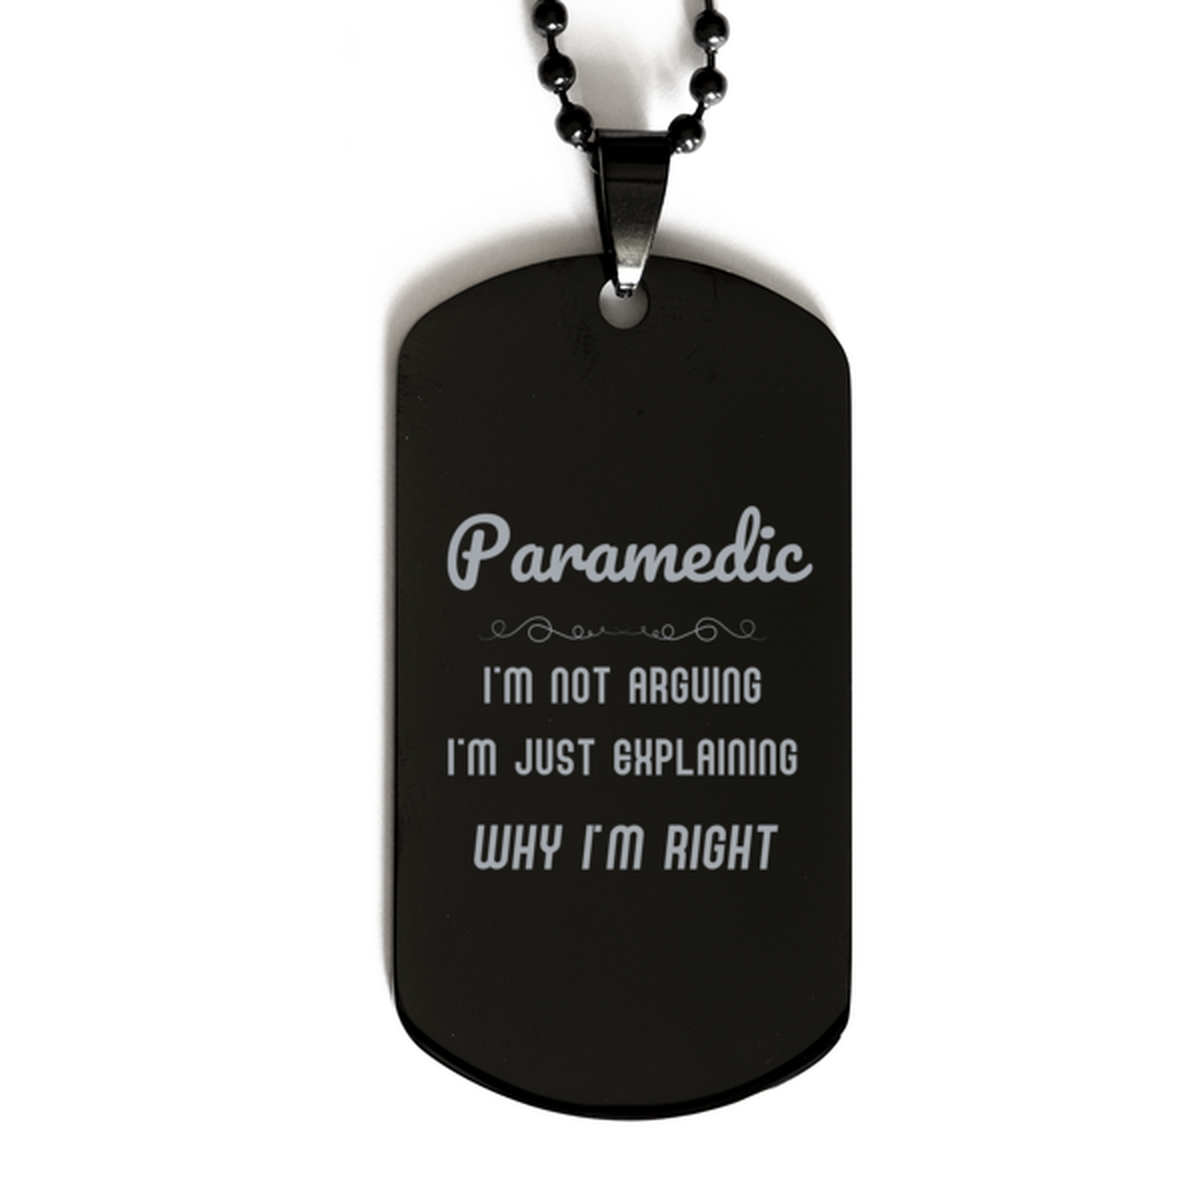 Paramedic I'm not Arguing. I'm Just Explaining Why I'm RIGHT Black Dog Tag, Funny Saying Quote Paramedic Gifts For Paramedic Graduation Birthday Christmas Gifts for Men Women Coworker